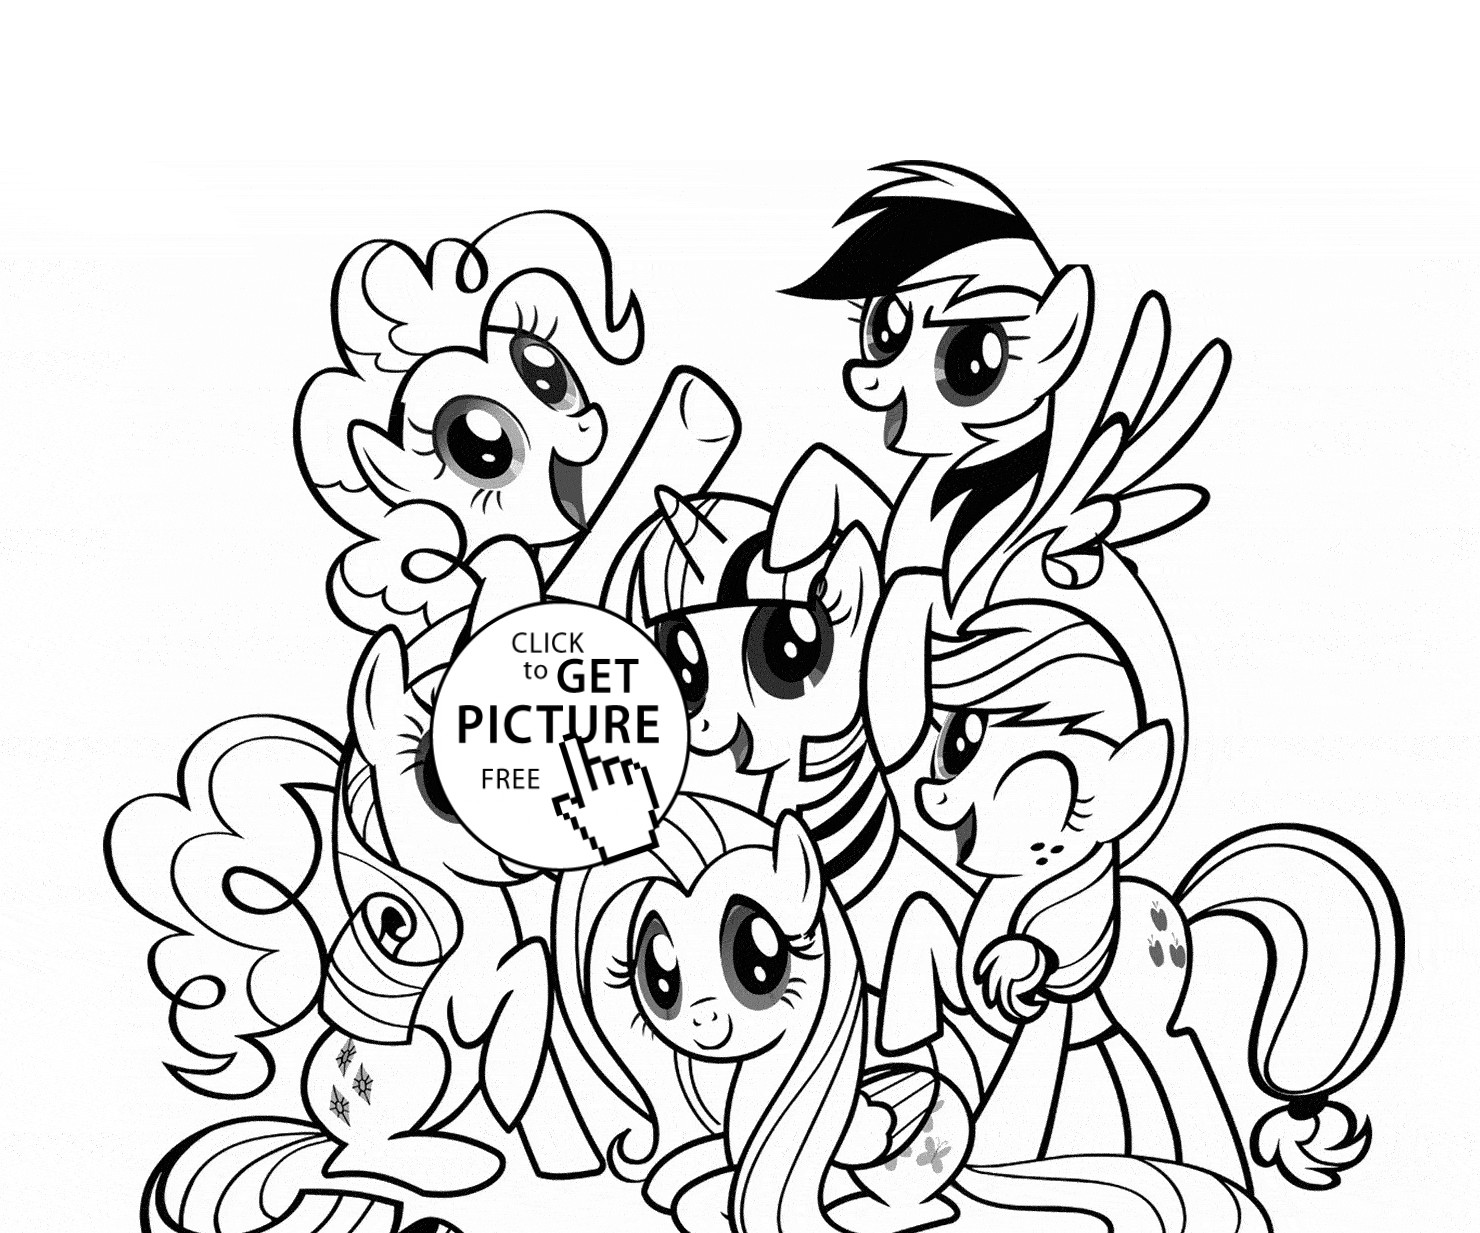 Coloring Sheets For Girls Mlp
 My Little Pony coloring page for kids for girls coloring